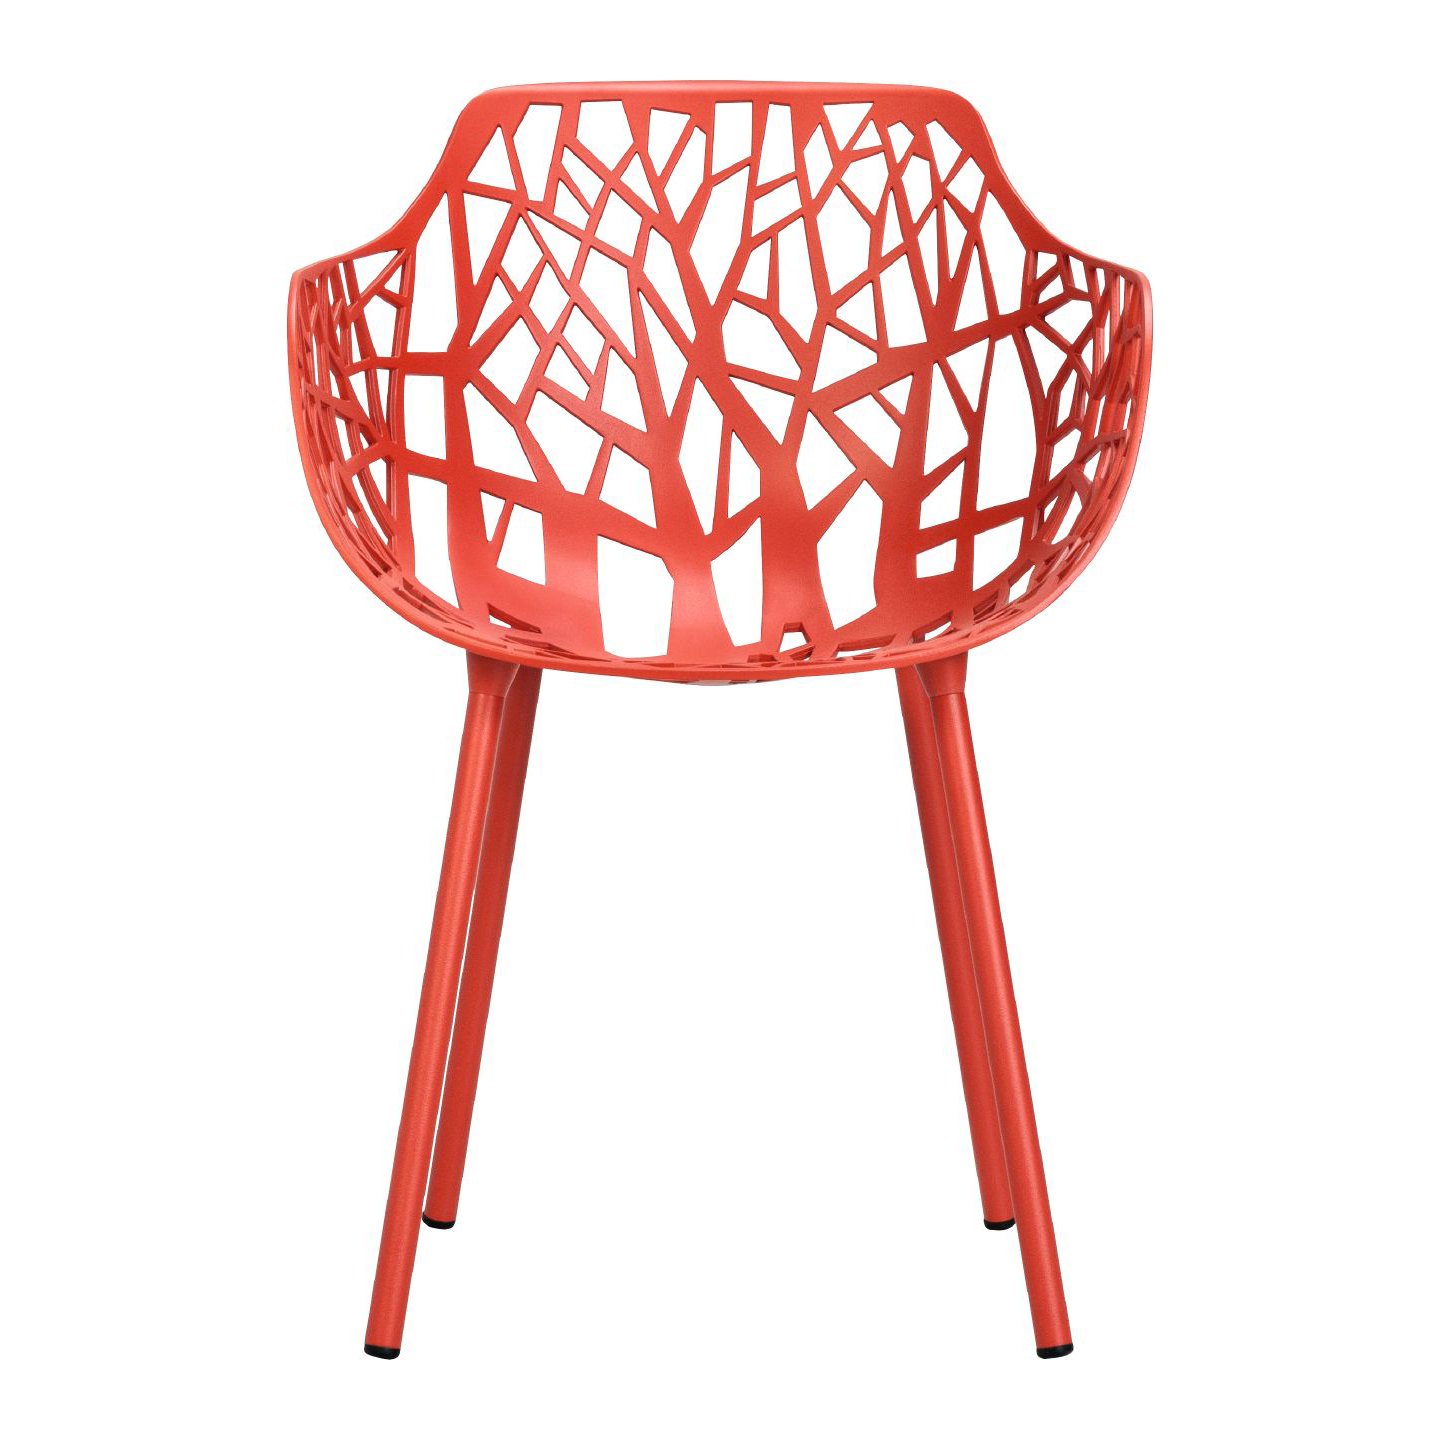 Haworth Forest stool in red color front view